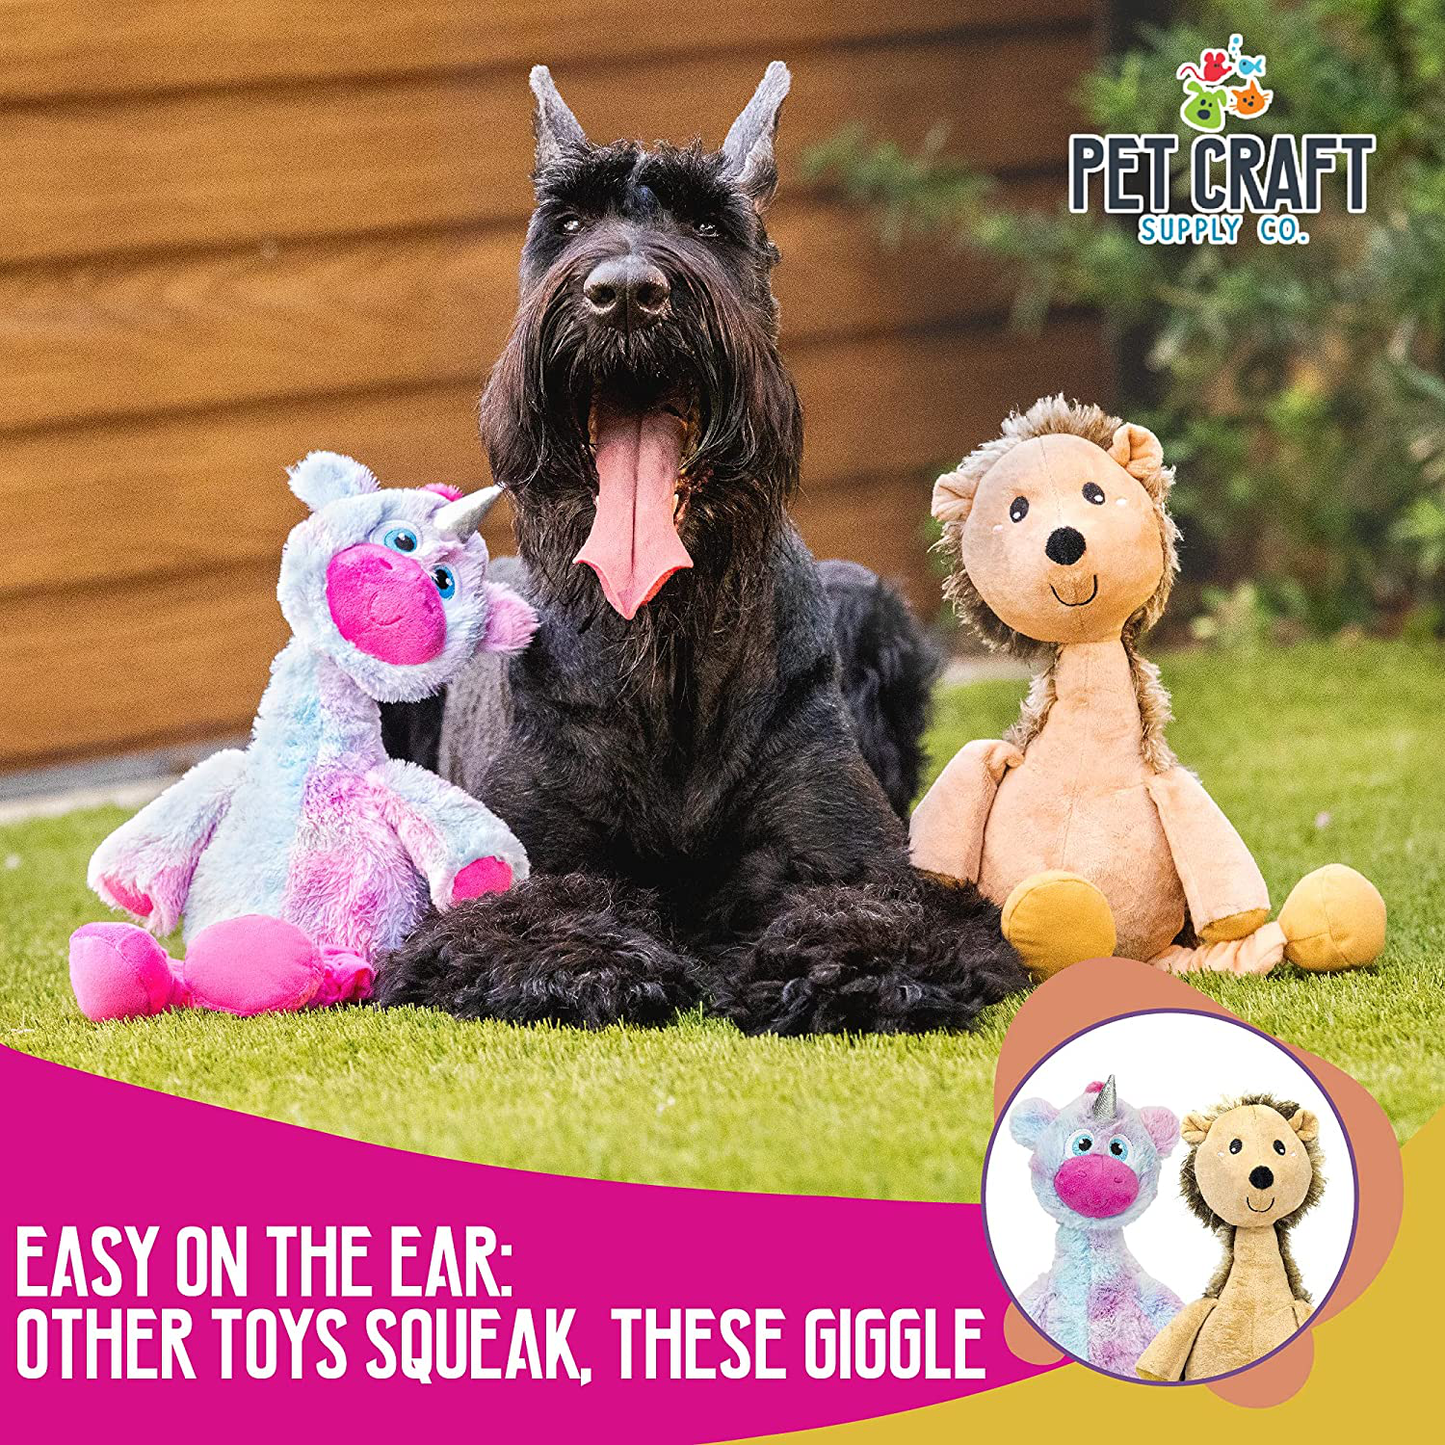 Pet Craft Supply Jiggle Giggle Dog Toys Funny Cute Giggling Sound Wiggly Shaking Tug Fetch Soft Chew Cuddle Plush Interactive Big Dog Toy for Medium to Large Breeds Multipack Boredom Relief